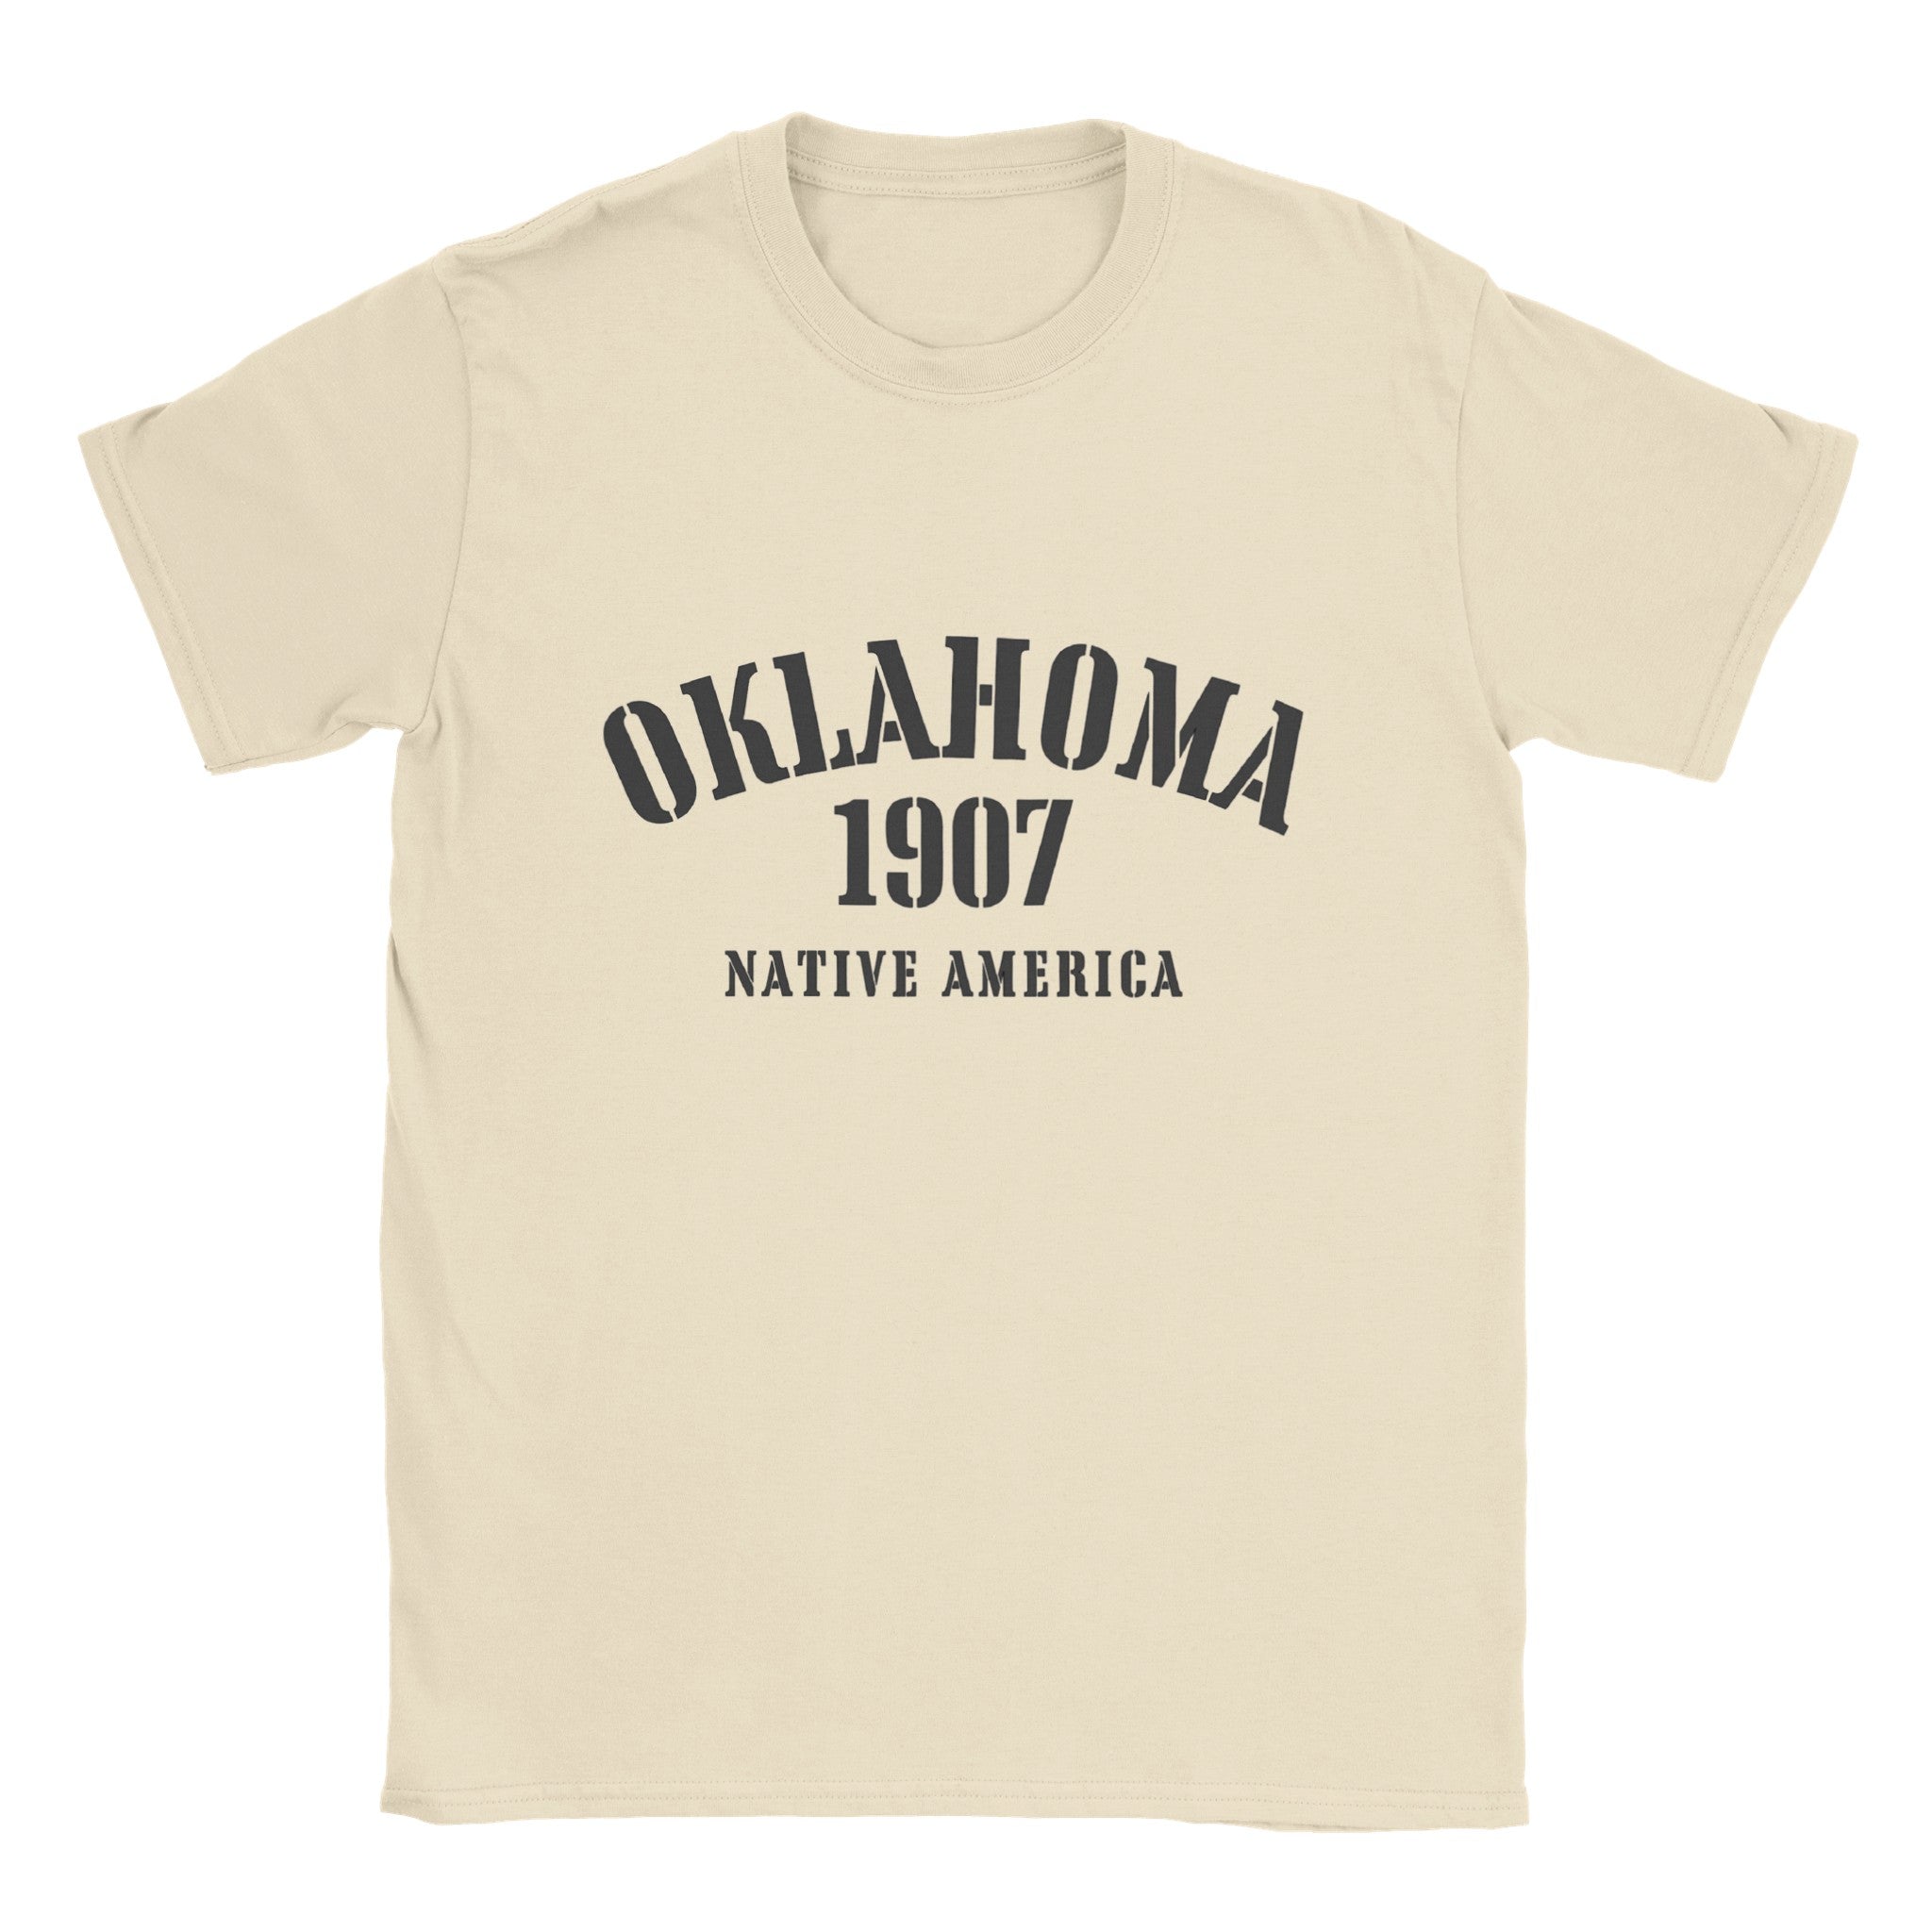 Oklahoma- Classic Unisex Crewneck States T-shirt - Creations by Chris and Carlos